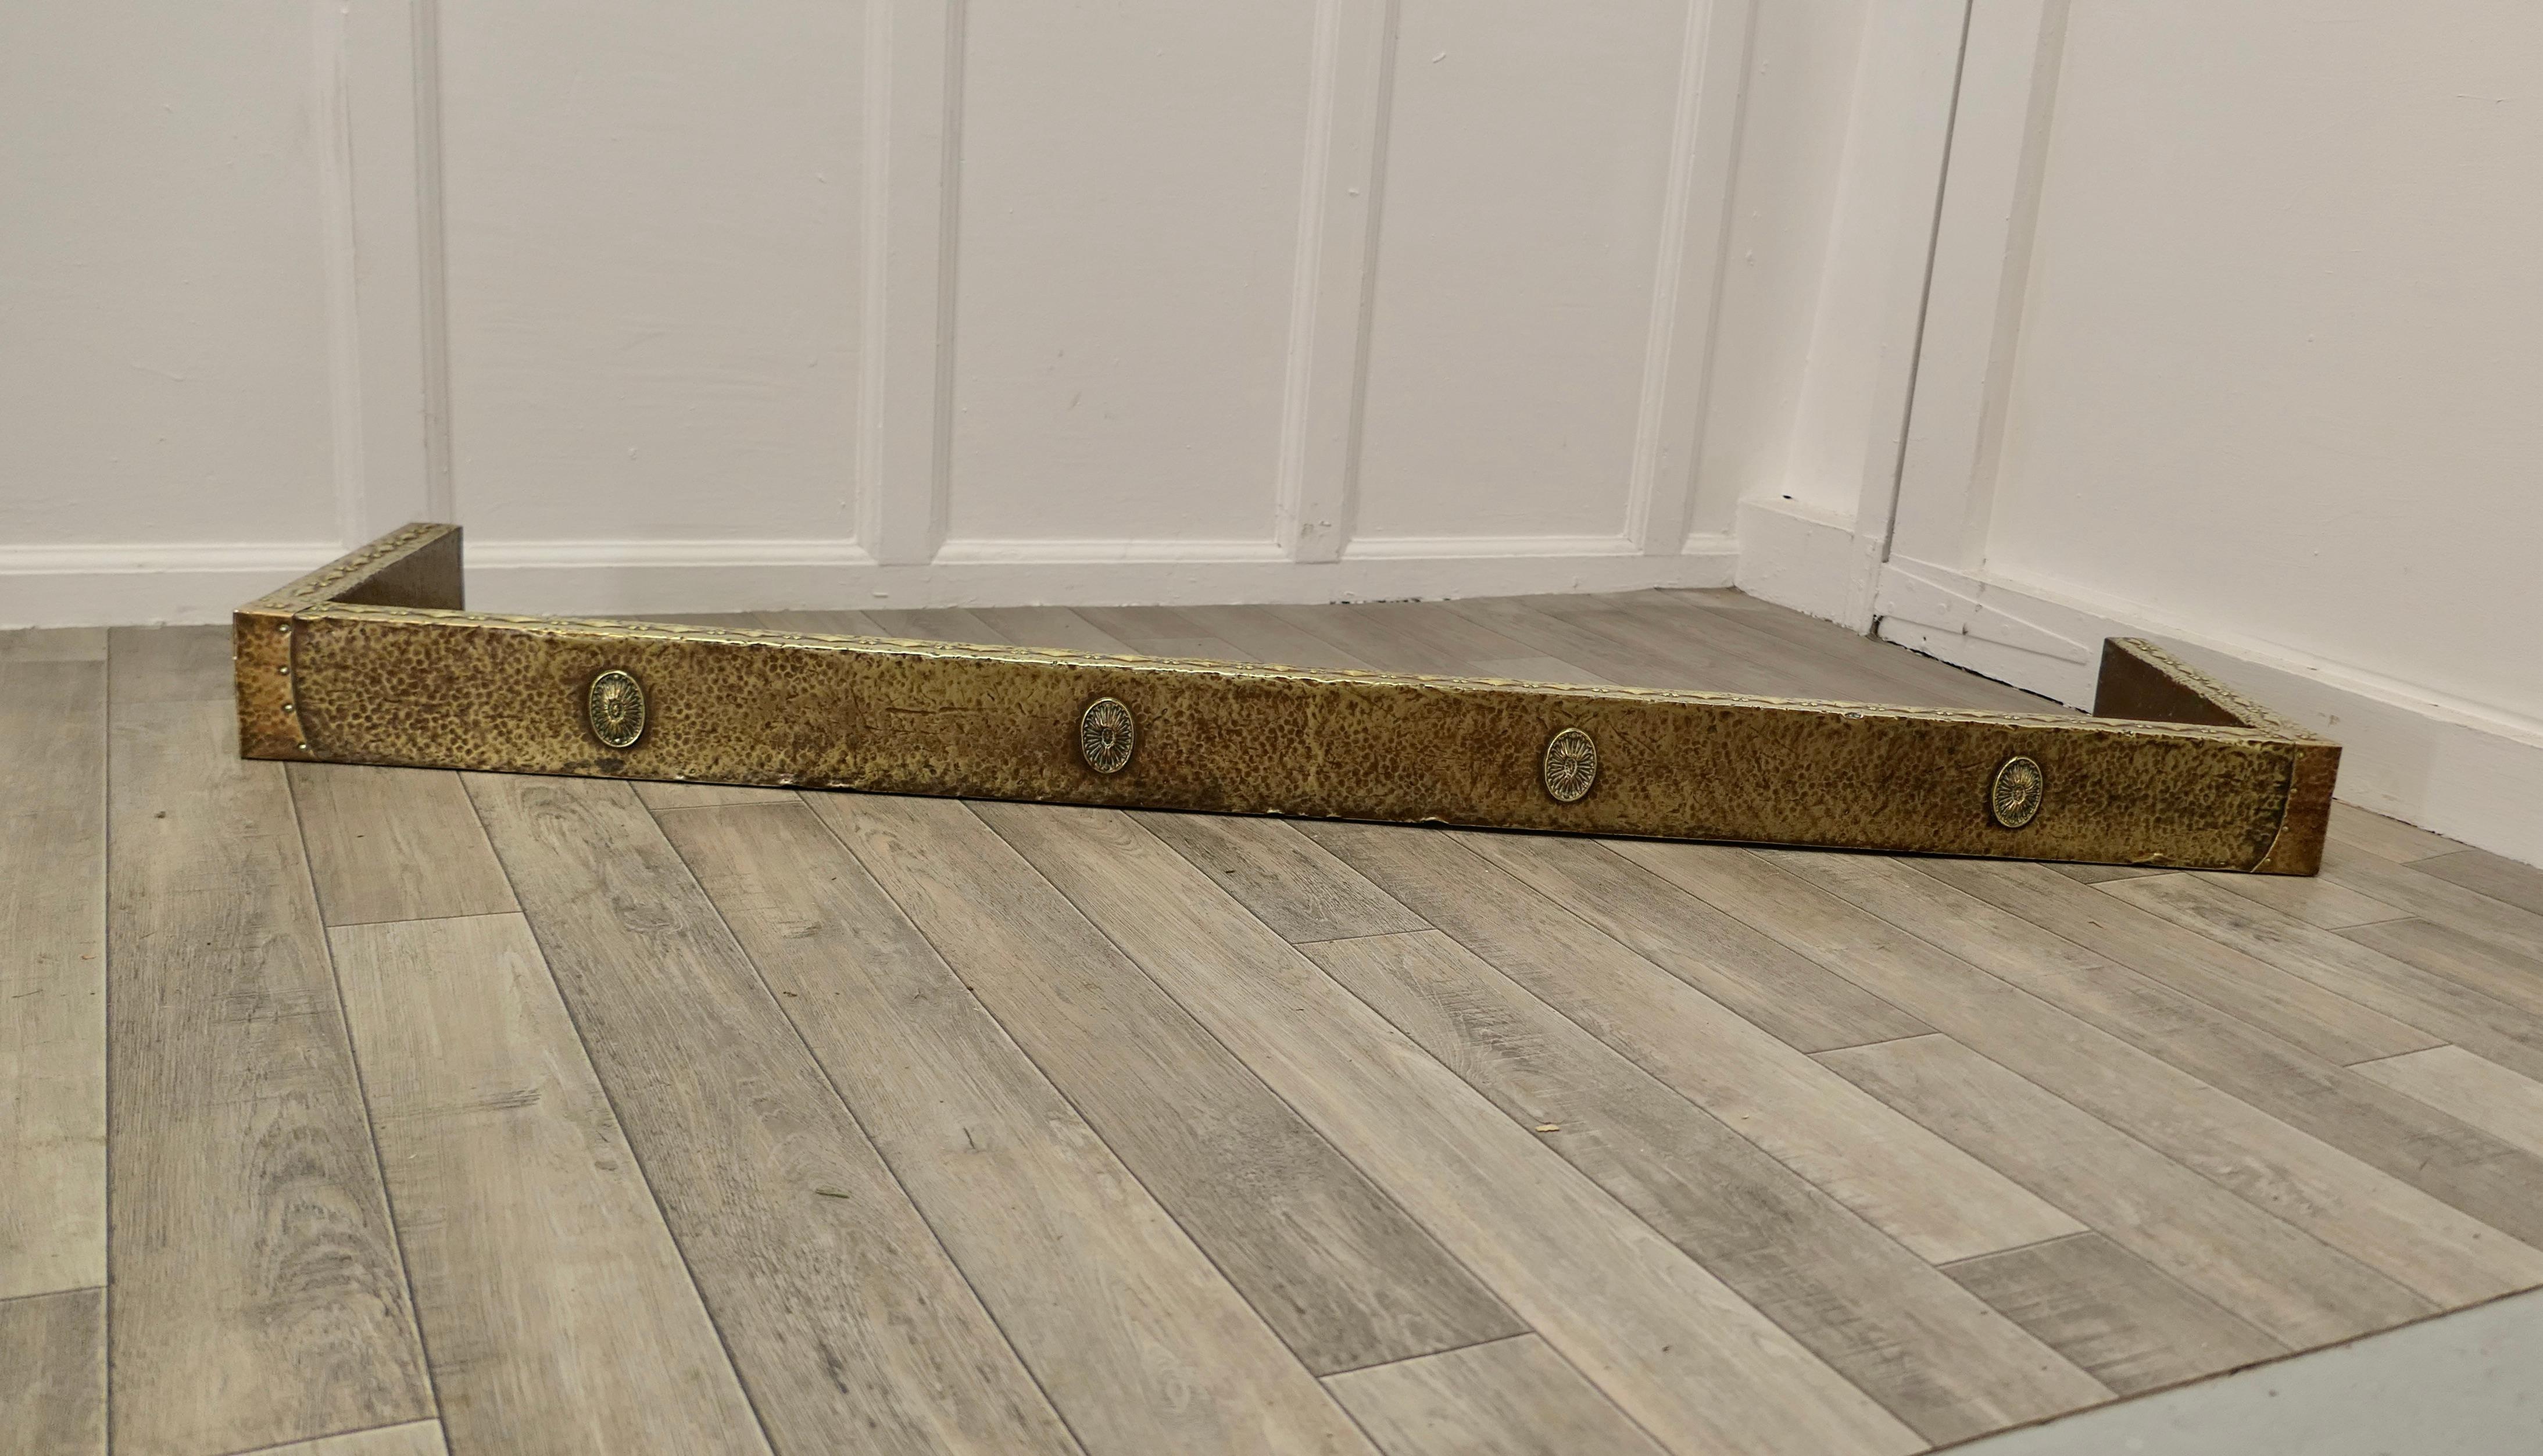 Long Arts and Crafts Beaten Brass Fender For Sale 1